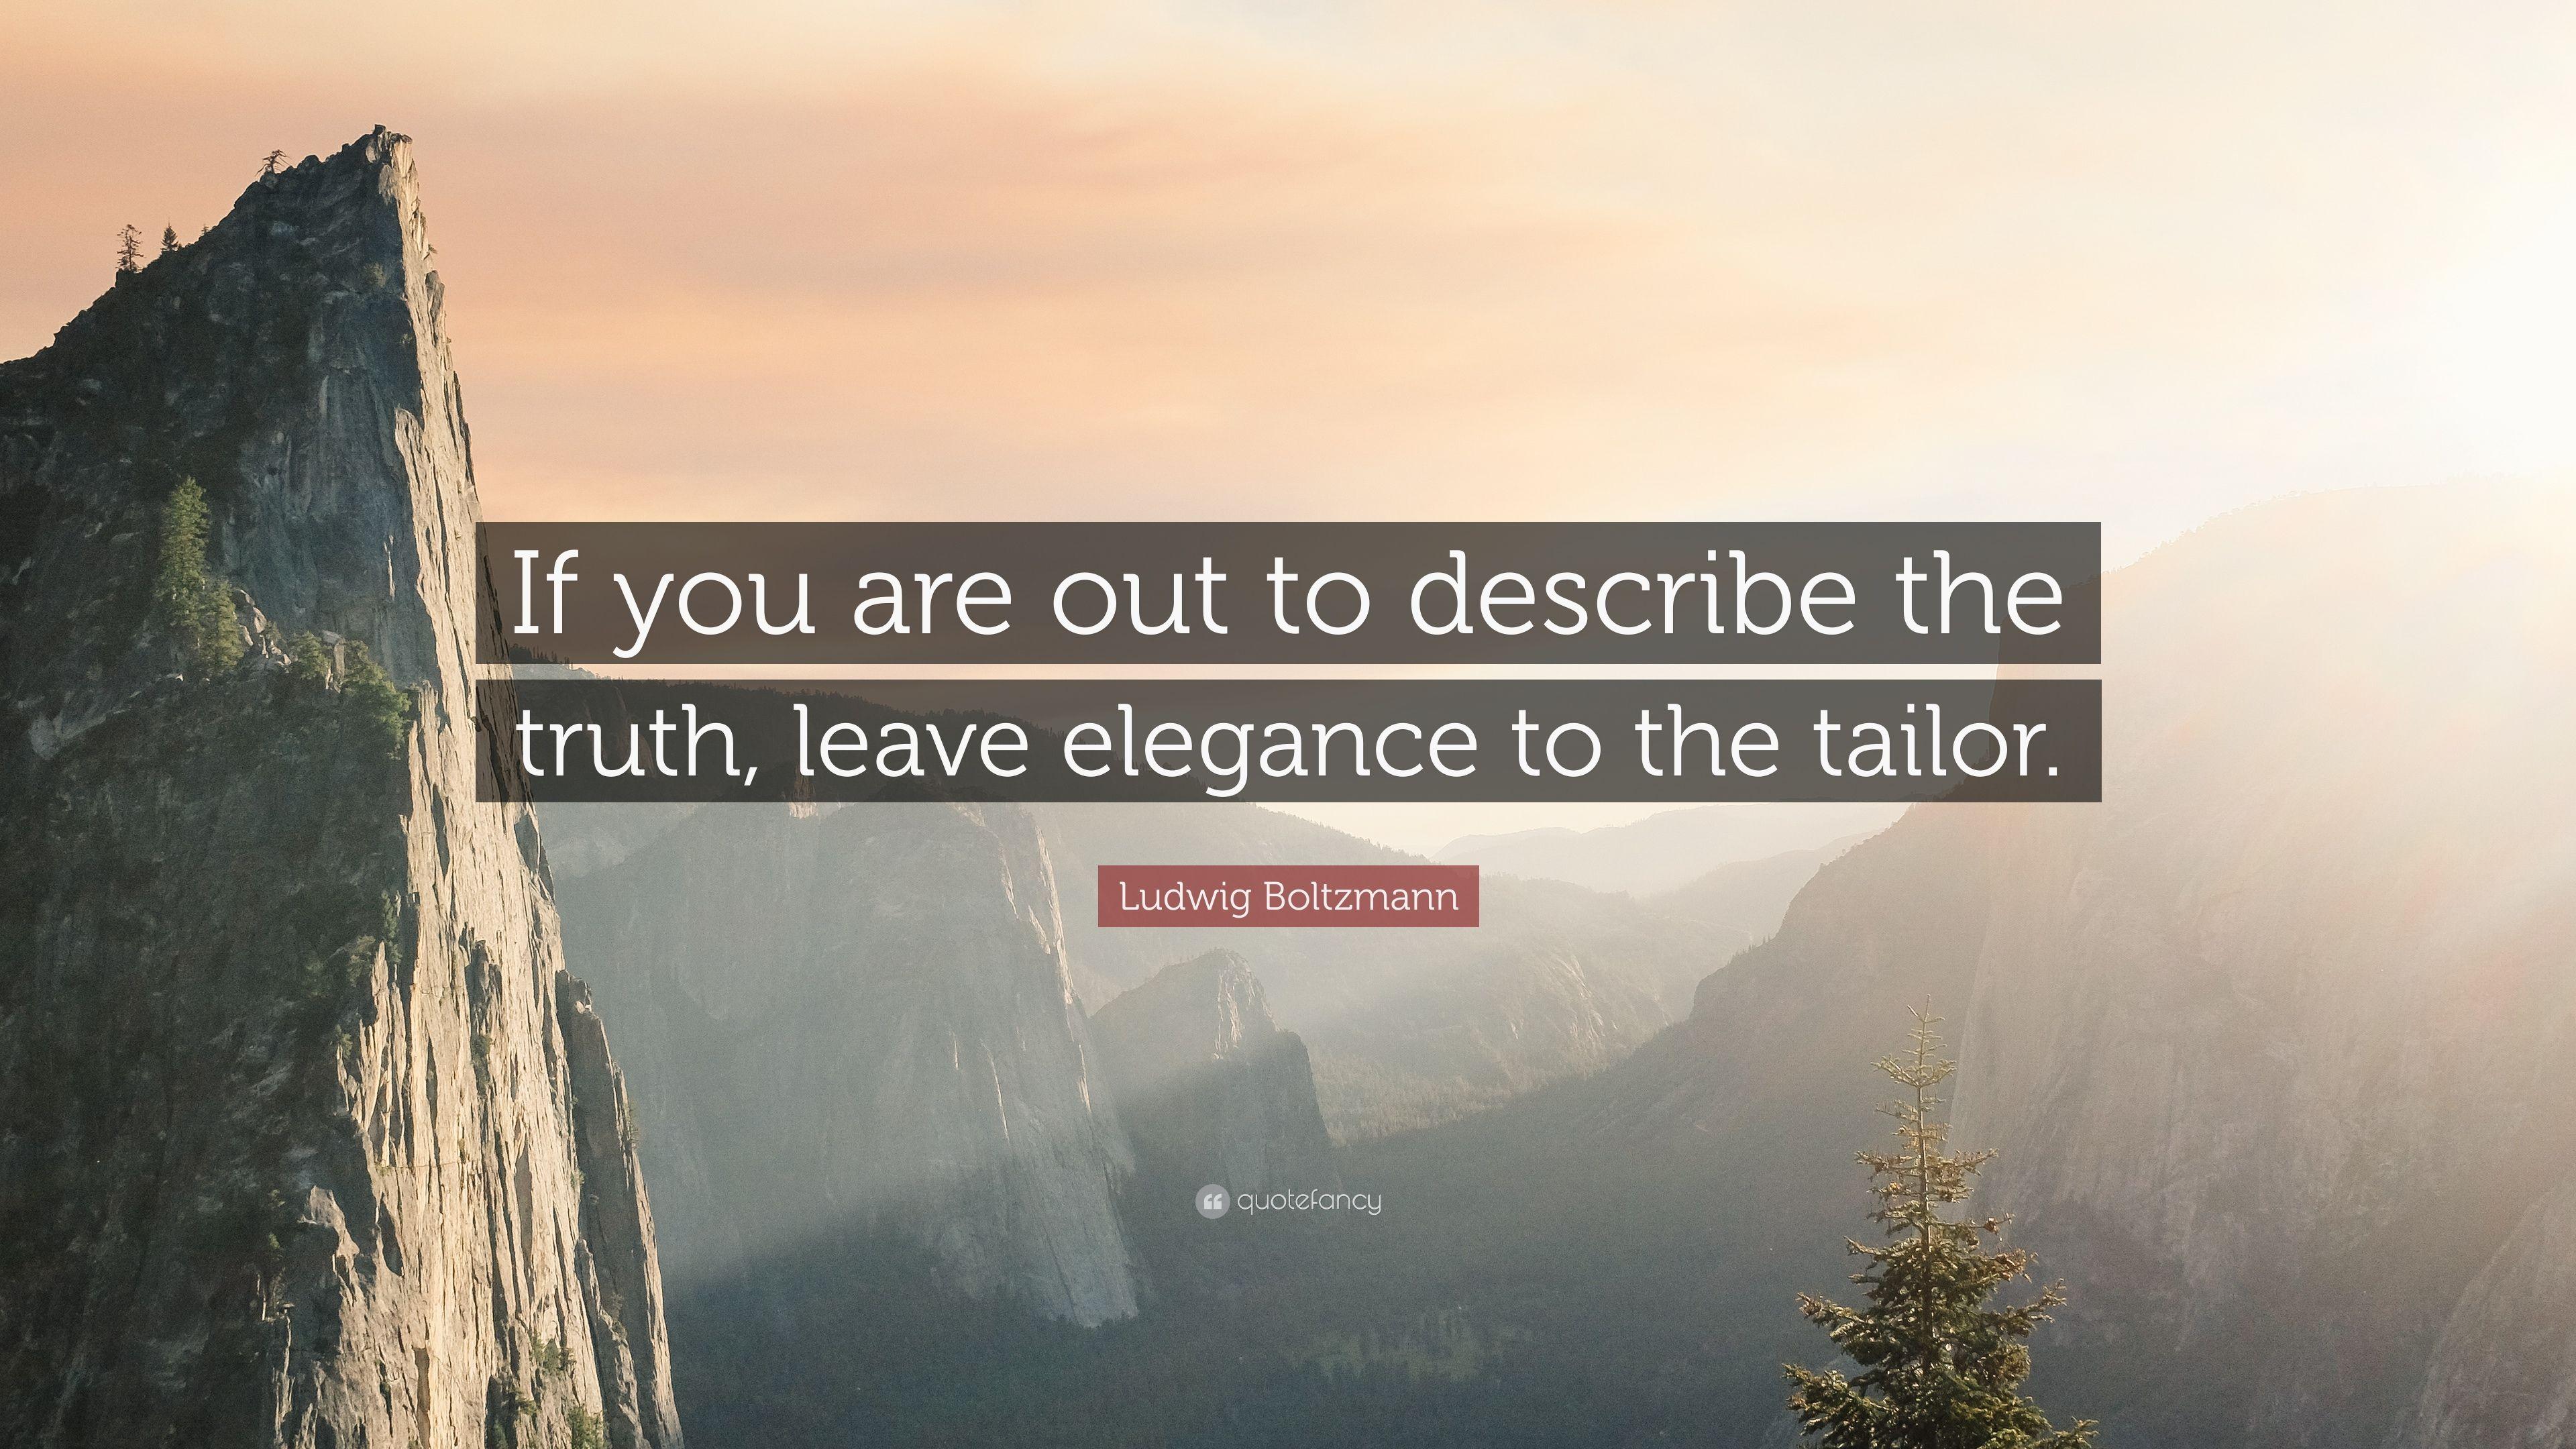 Ludwig Boltzmann Quote: “If you are out to describe the truth, leave